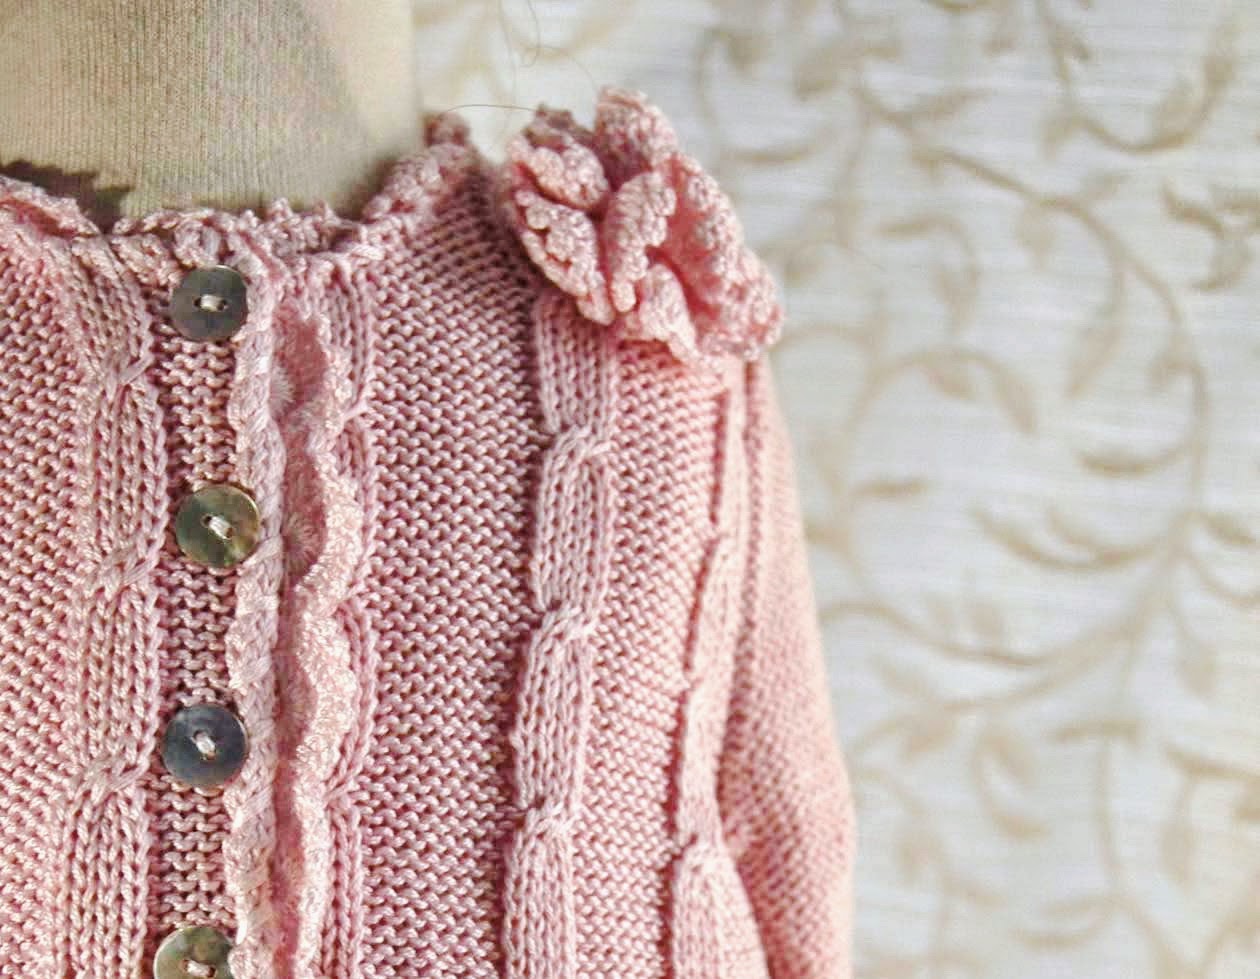 https://www.etsy.com/listing/180356802/cotton-knit-pink-baby-girl-kim-coat?ref=shop_home_active_14